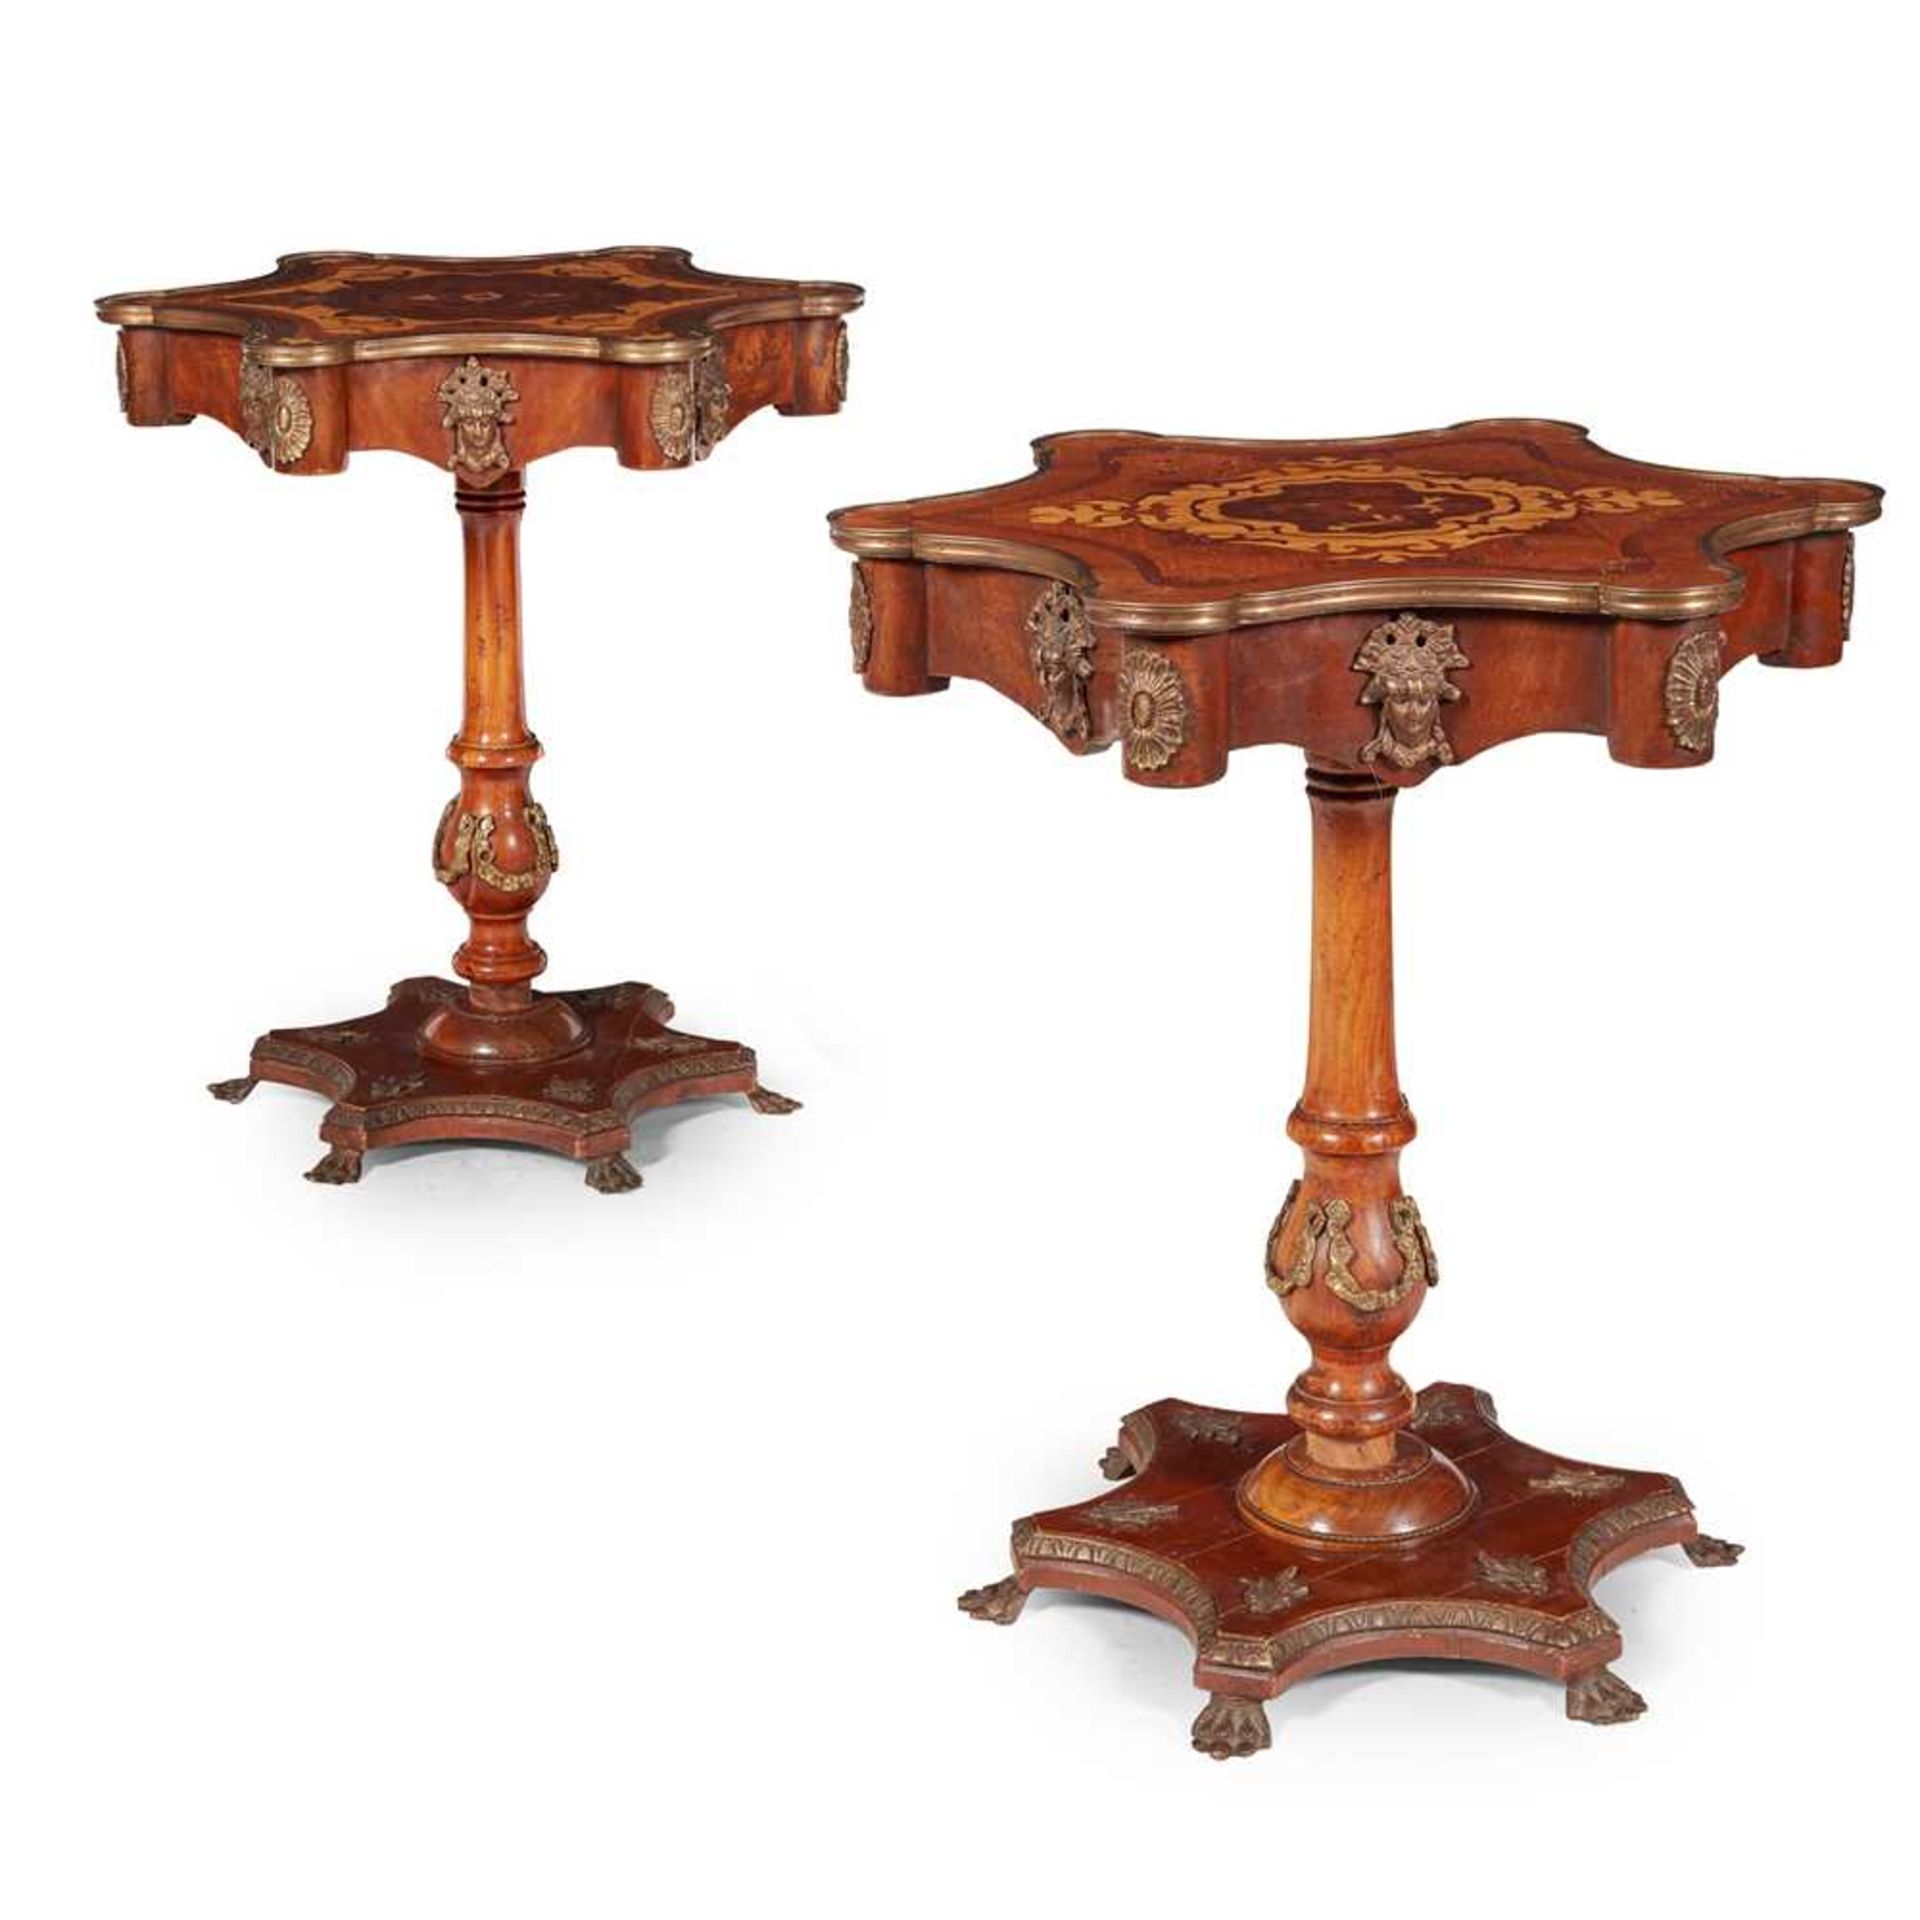 PAIR OF CONTINENTAL KINGWOOD, MARQUETRY, BRASS MOUNTED OCCASIONAL TABLES LATE 19TH CENTURY